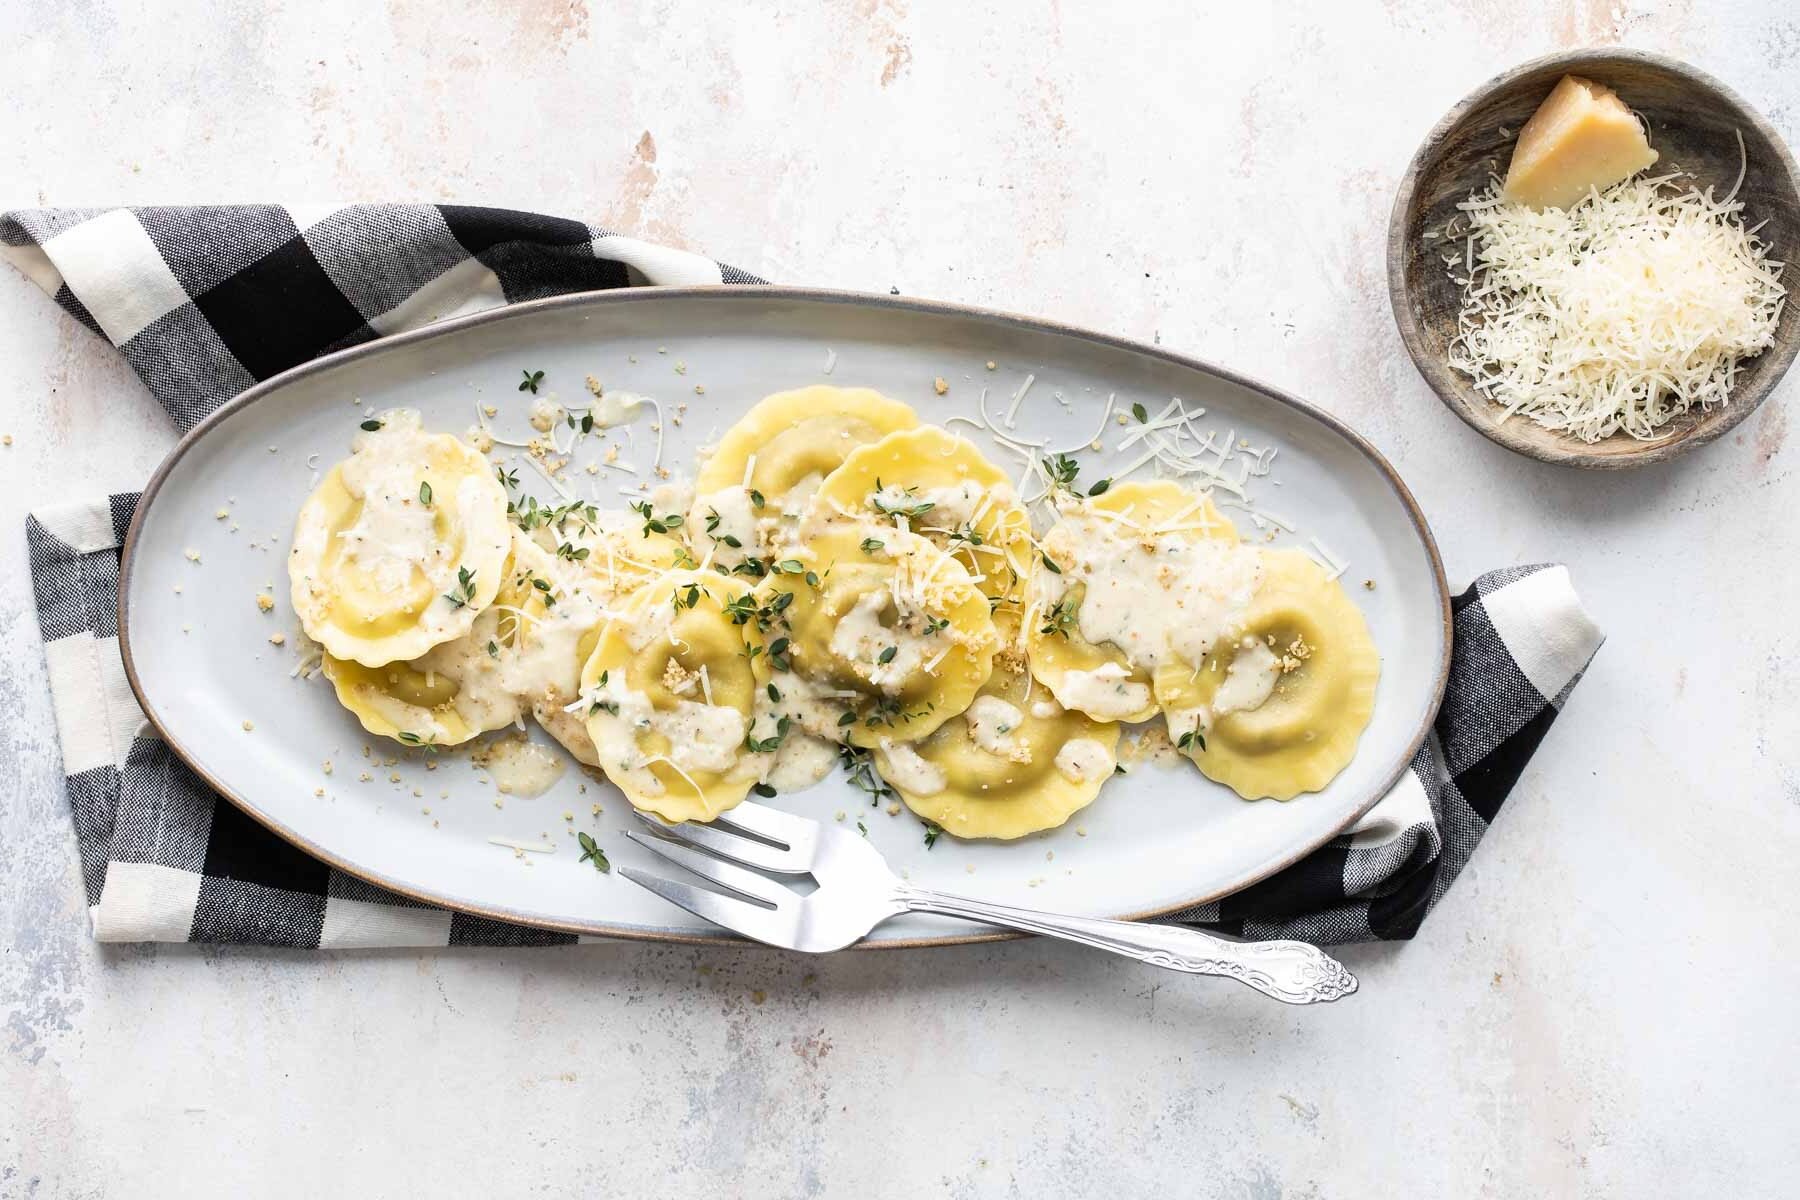 A plate of mushroom ravioli with a small bowl of parmesan cheese.